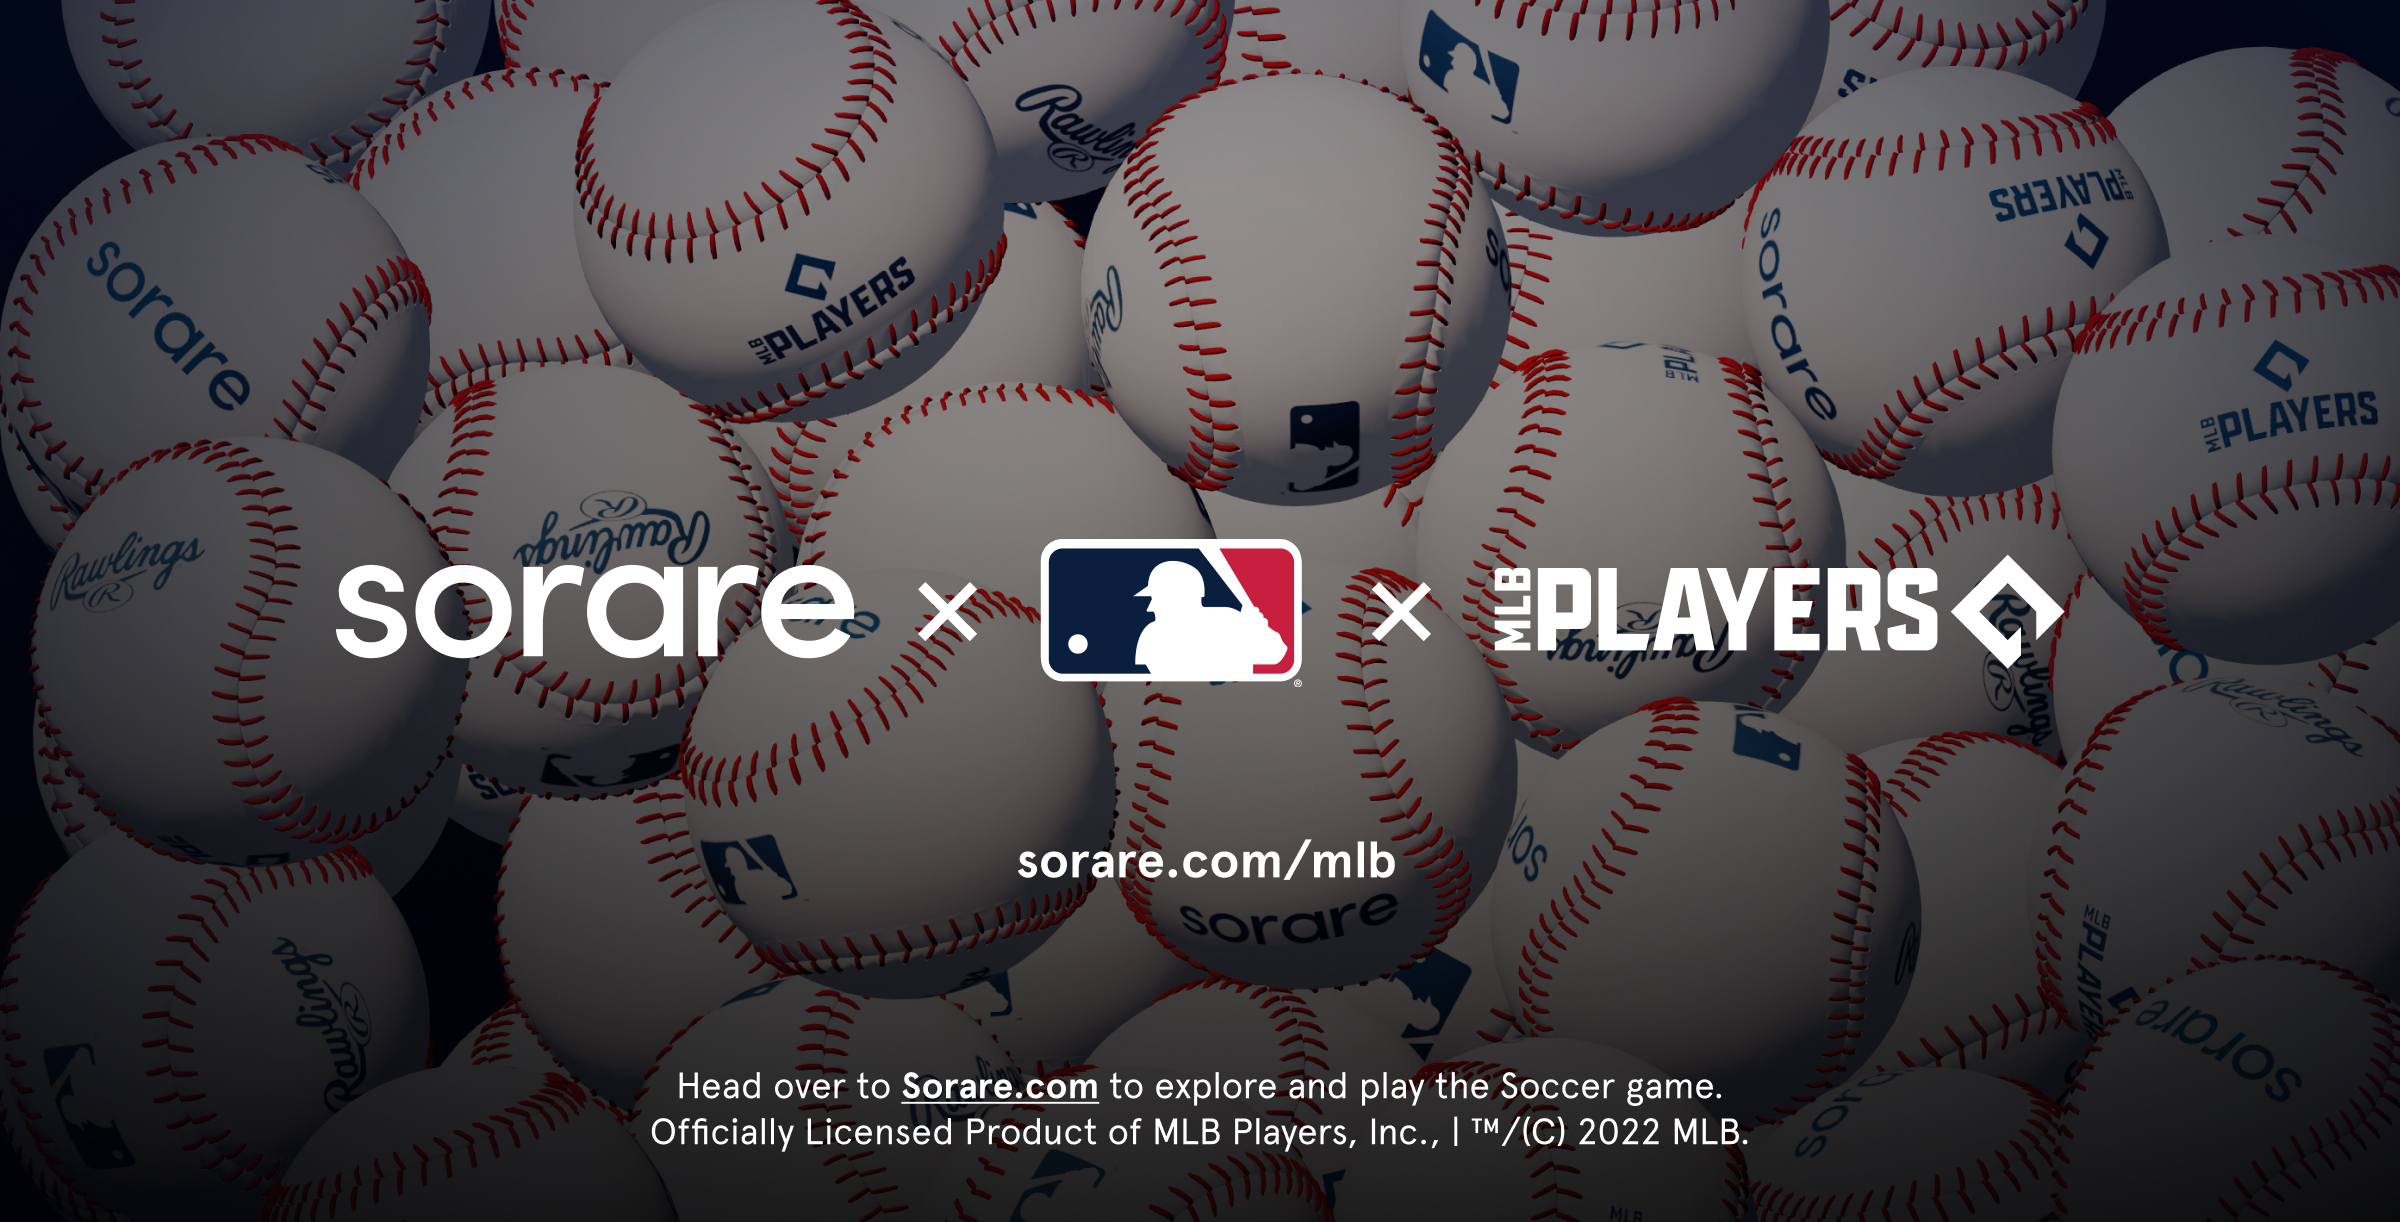 Fanatics strikes deal to become exclusive licensee for MLB cards  ESPN